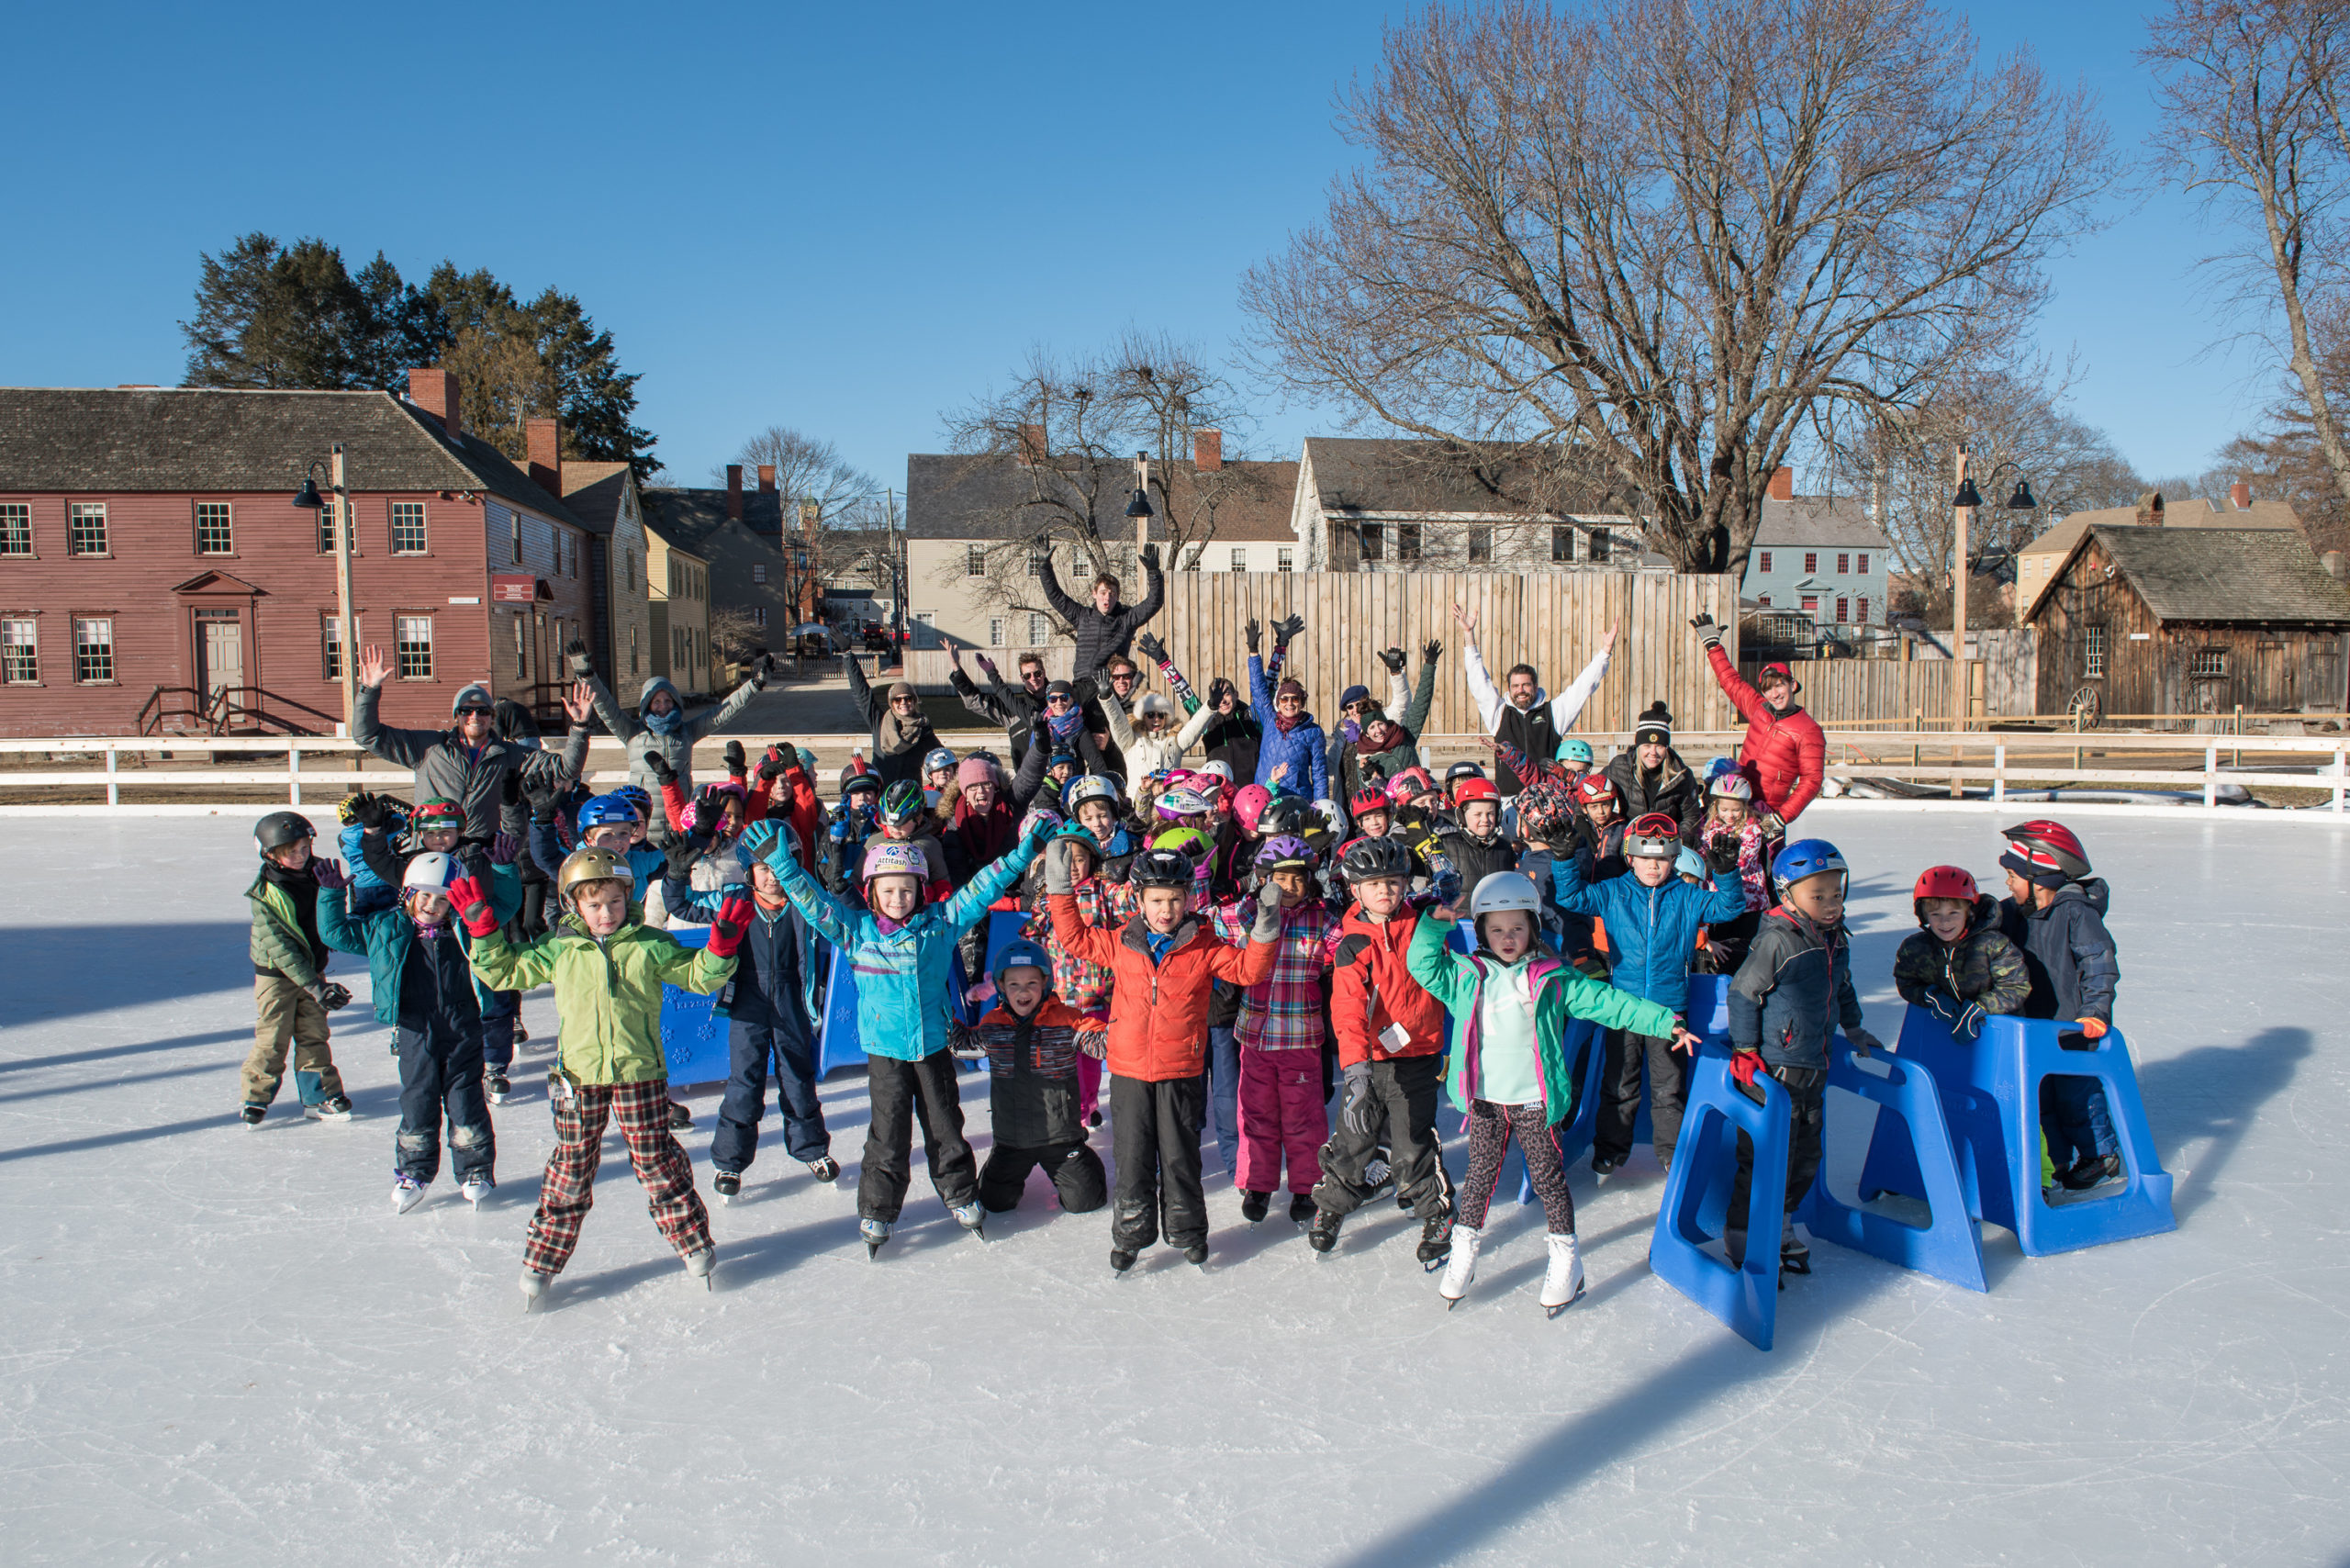 A group of brightly dressed skaters comprised of first grade students and the Ice Dance International Company pose together on the ice.